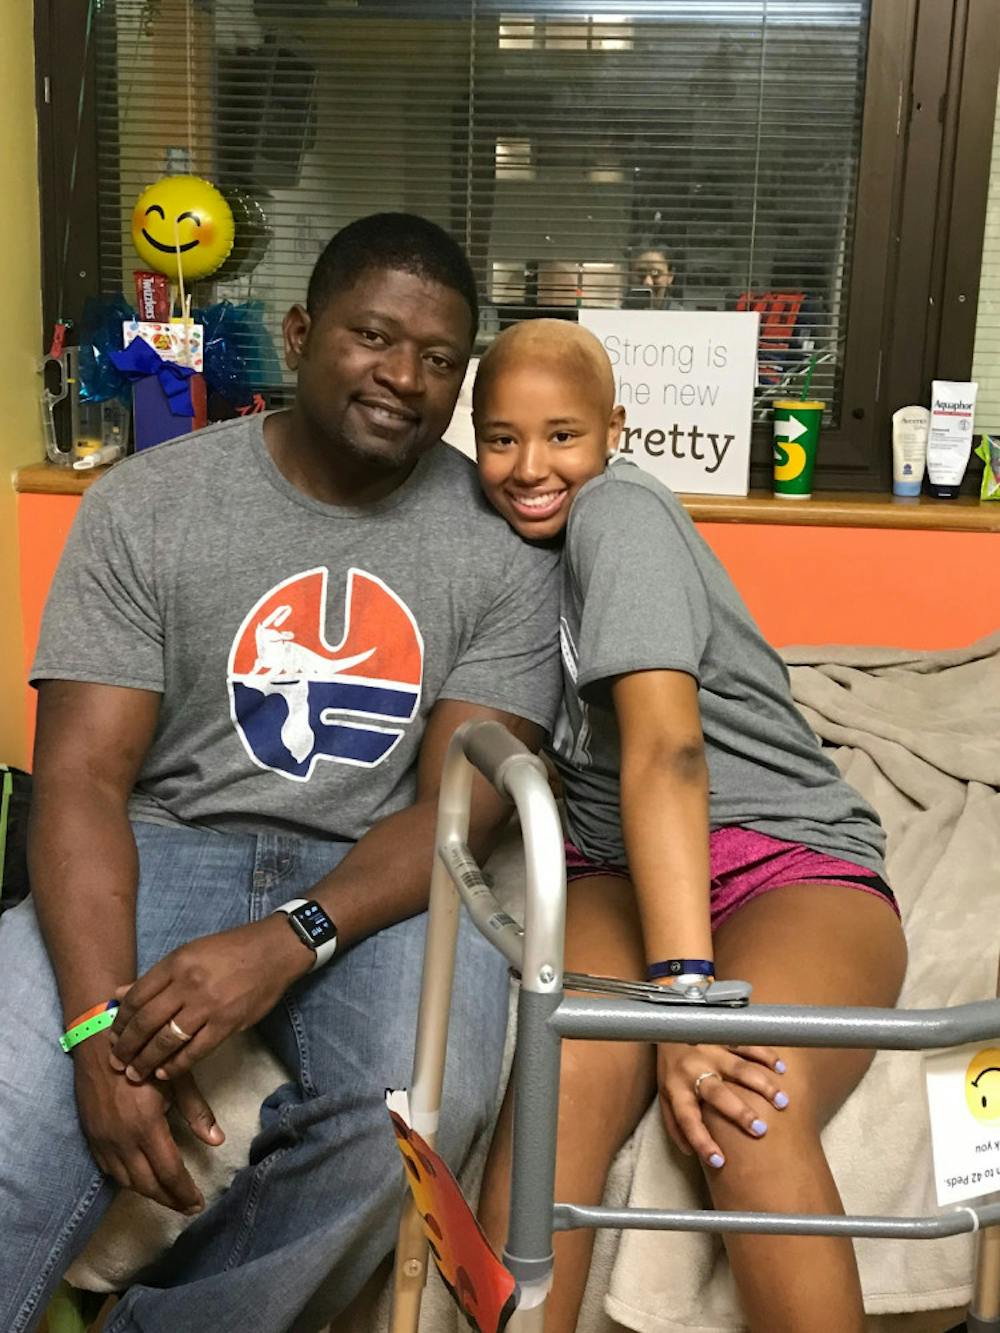 <p>Lauren Evans sits with her father, Jerome, at UF Health Shands, where she was receiving cancer treatment. Currently cancer free, Evans attempted to break the selfie world record Sunday after the Florida soccer team's win over LSU in effort to raise awareness for pediatric cancer.   </p>